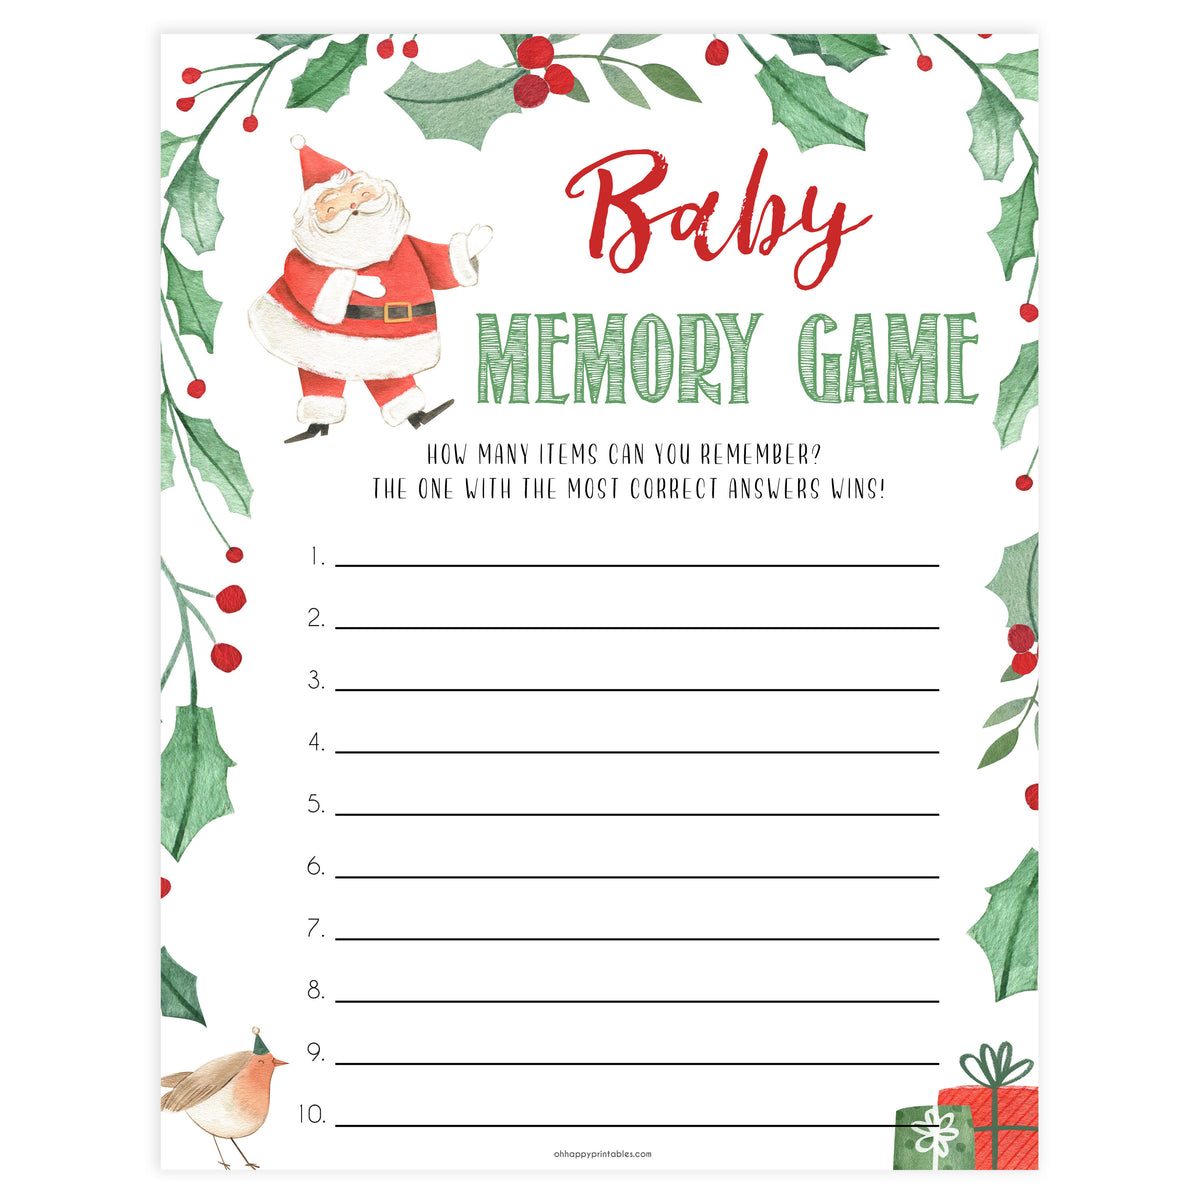 Christmas baby shower games, baby memory game, festive baby shower games, best baby shower games, top 10 baby games, baby shower ideas, baby shower games